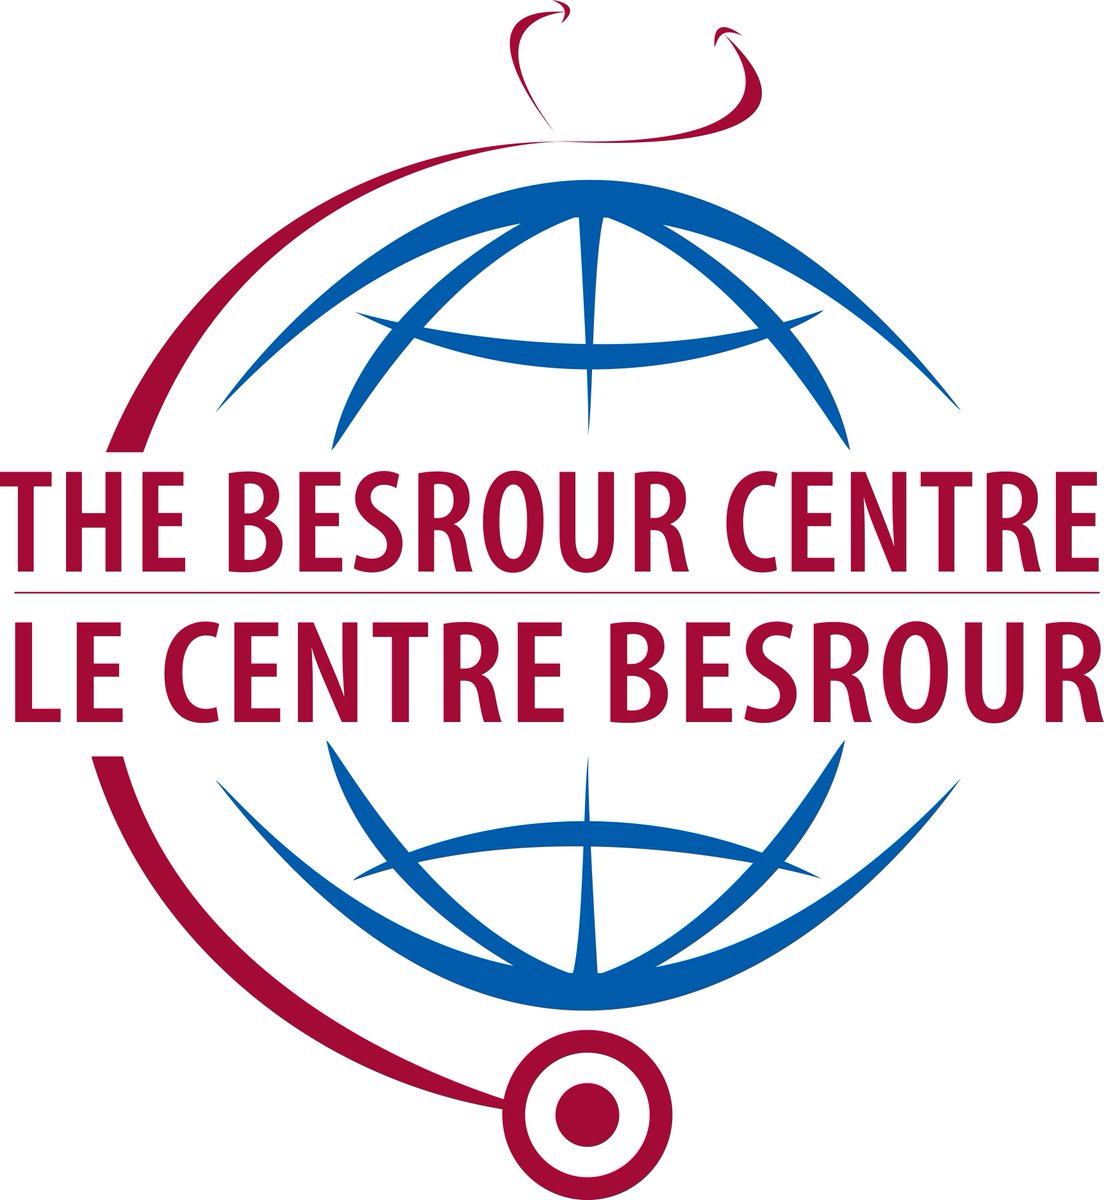 Following the #2016BesrourConf in Rio, @BesrourCentre hosts activities at #cfpcfmf in Vancouver, Canada on Nov 10.